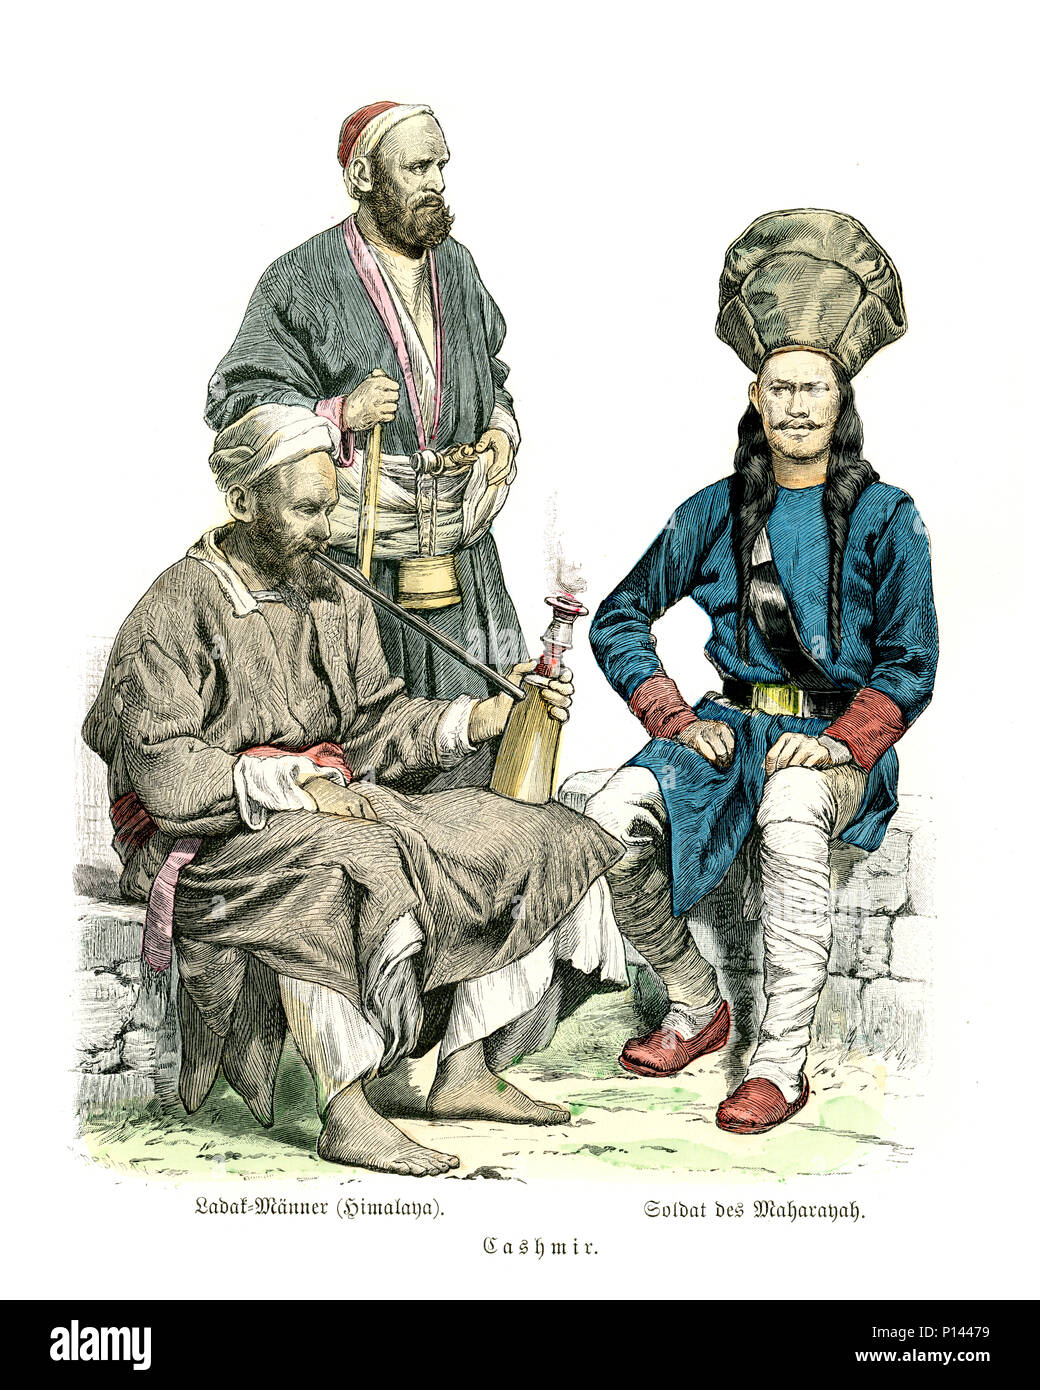 Vintage engraving of History of Fashion, Costumes of Kashmir, 19th Century. Ladak (Ladakh) men from Himalaya and soldier of Moharayah Stock Photo